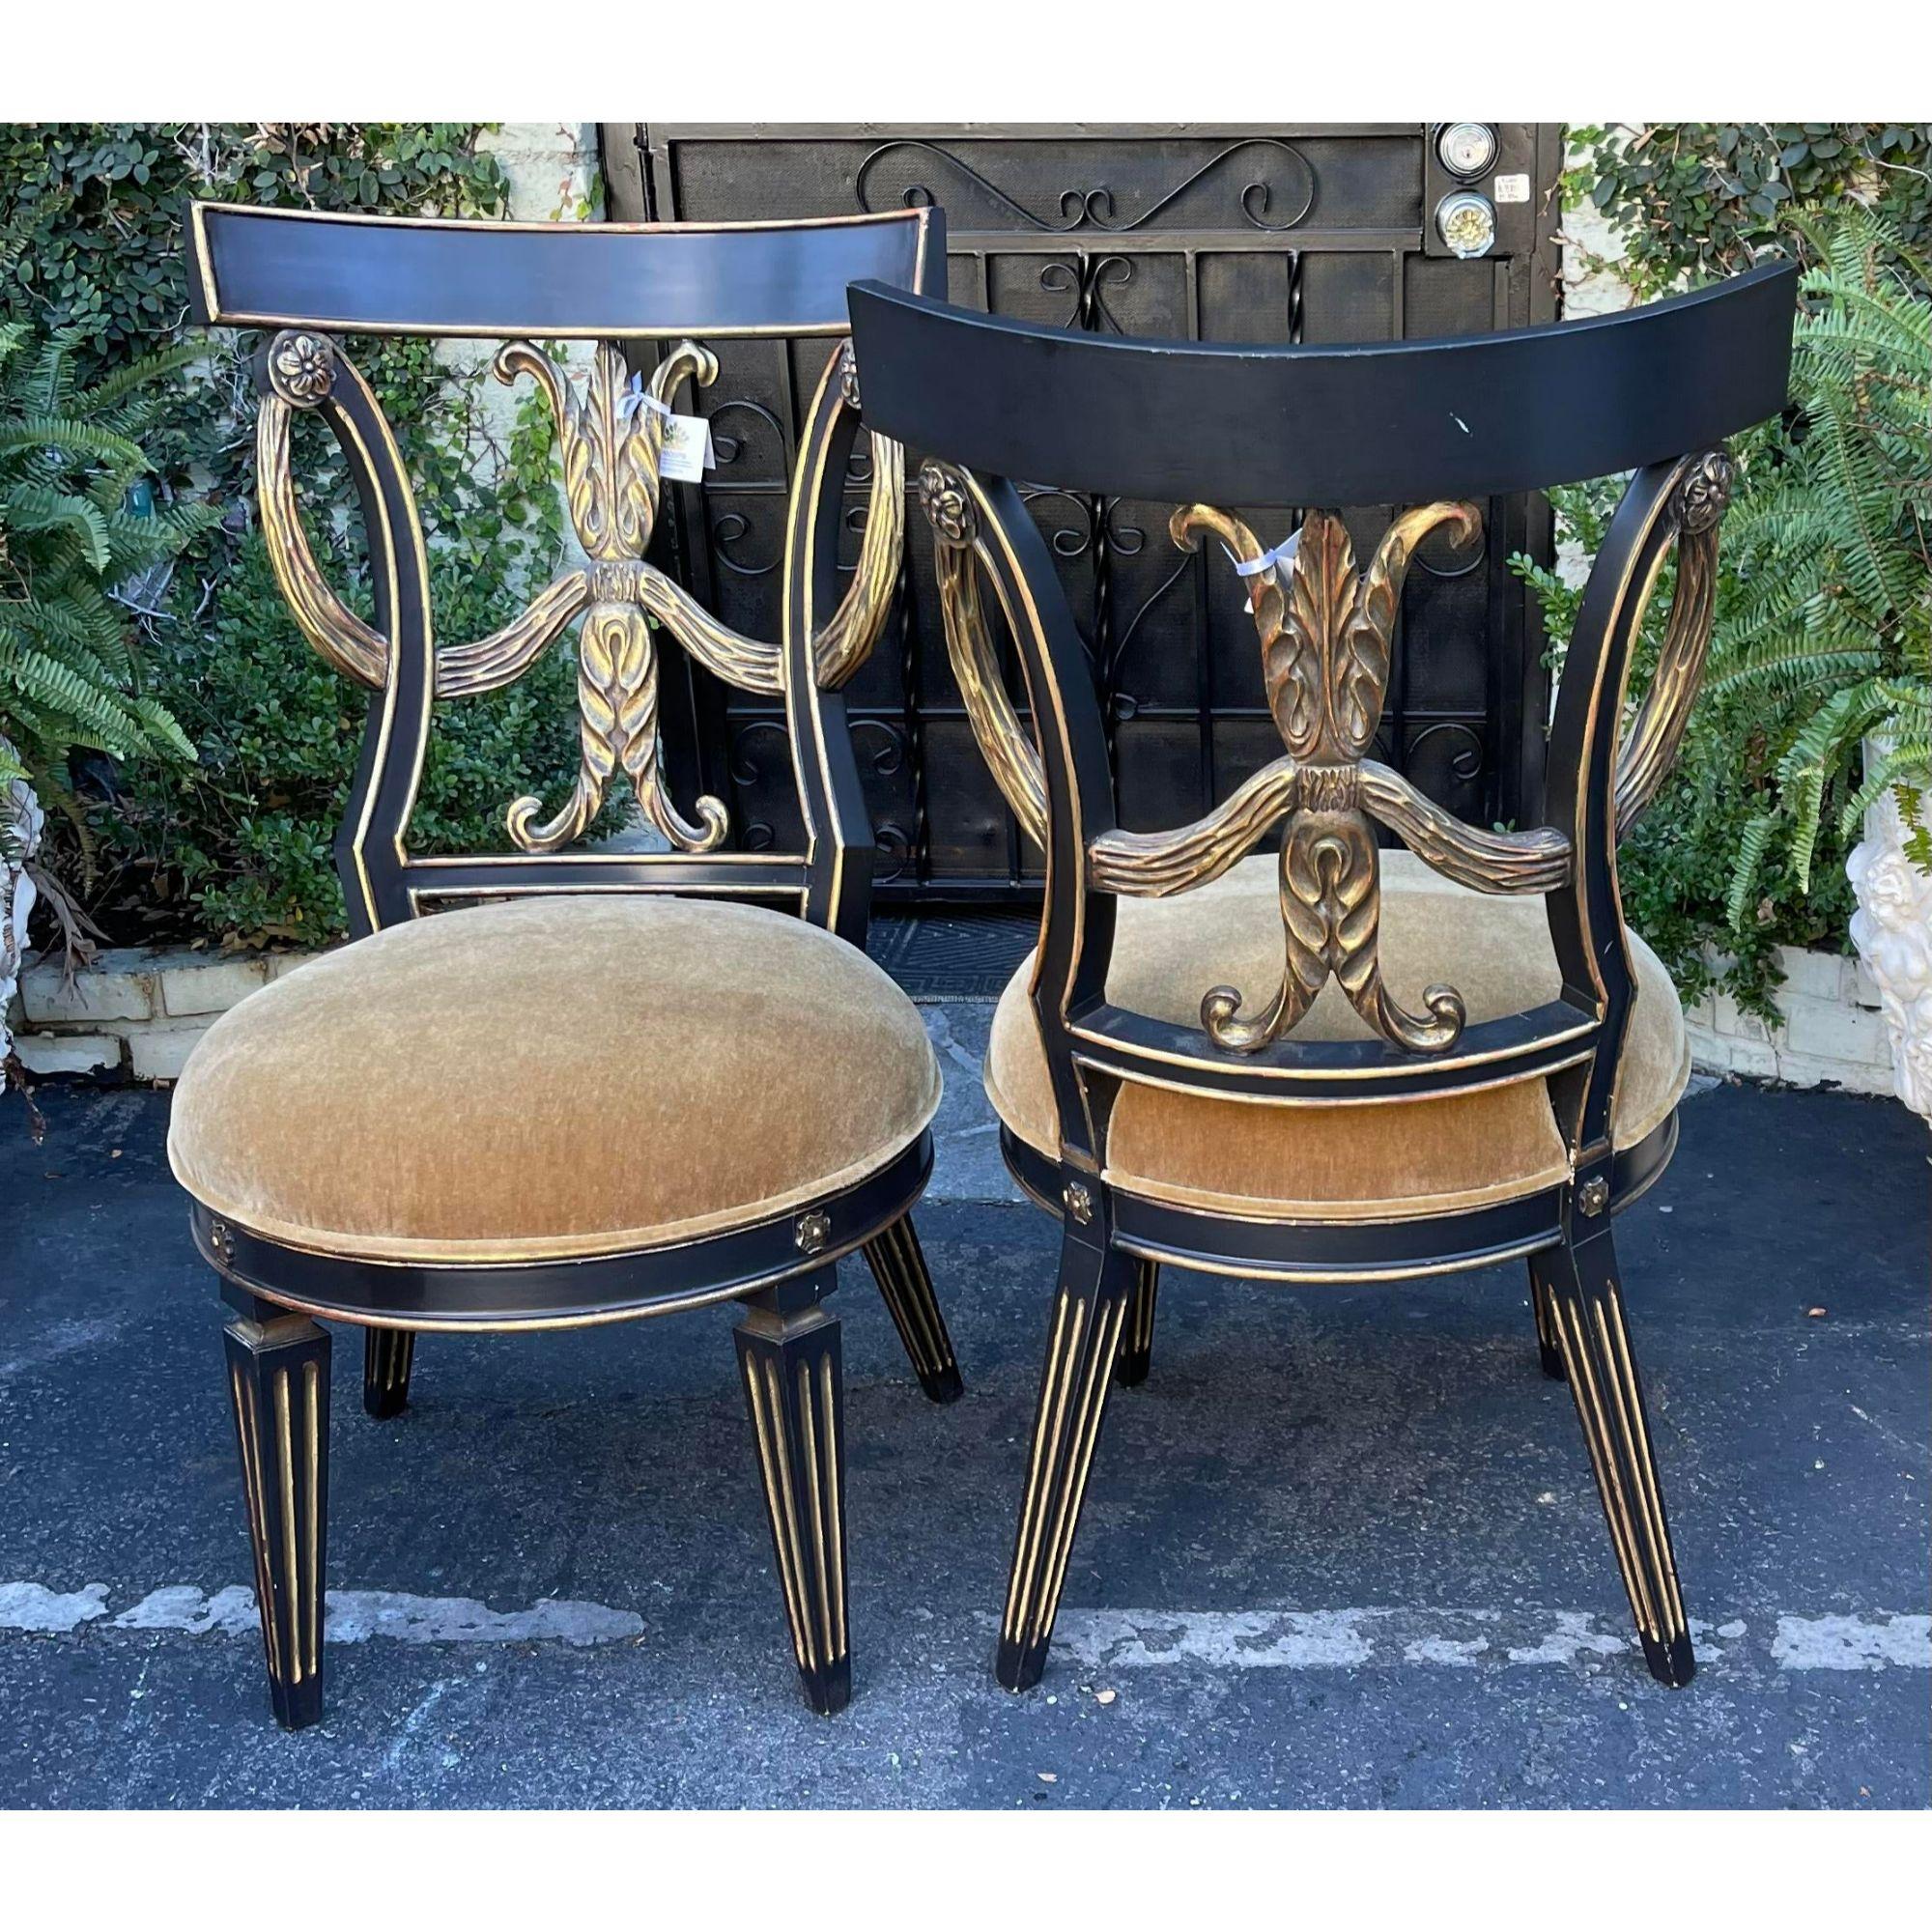 Ebonized Pair of Regency Style Giltwood & Mohair Chairs by Randy Esada Designs for Prospr For Sale